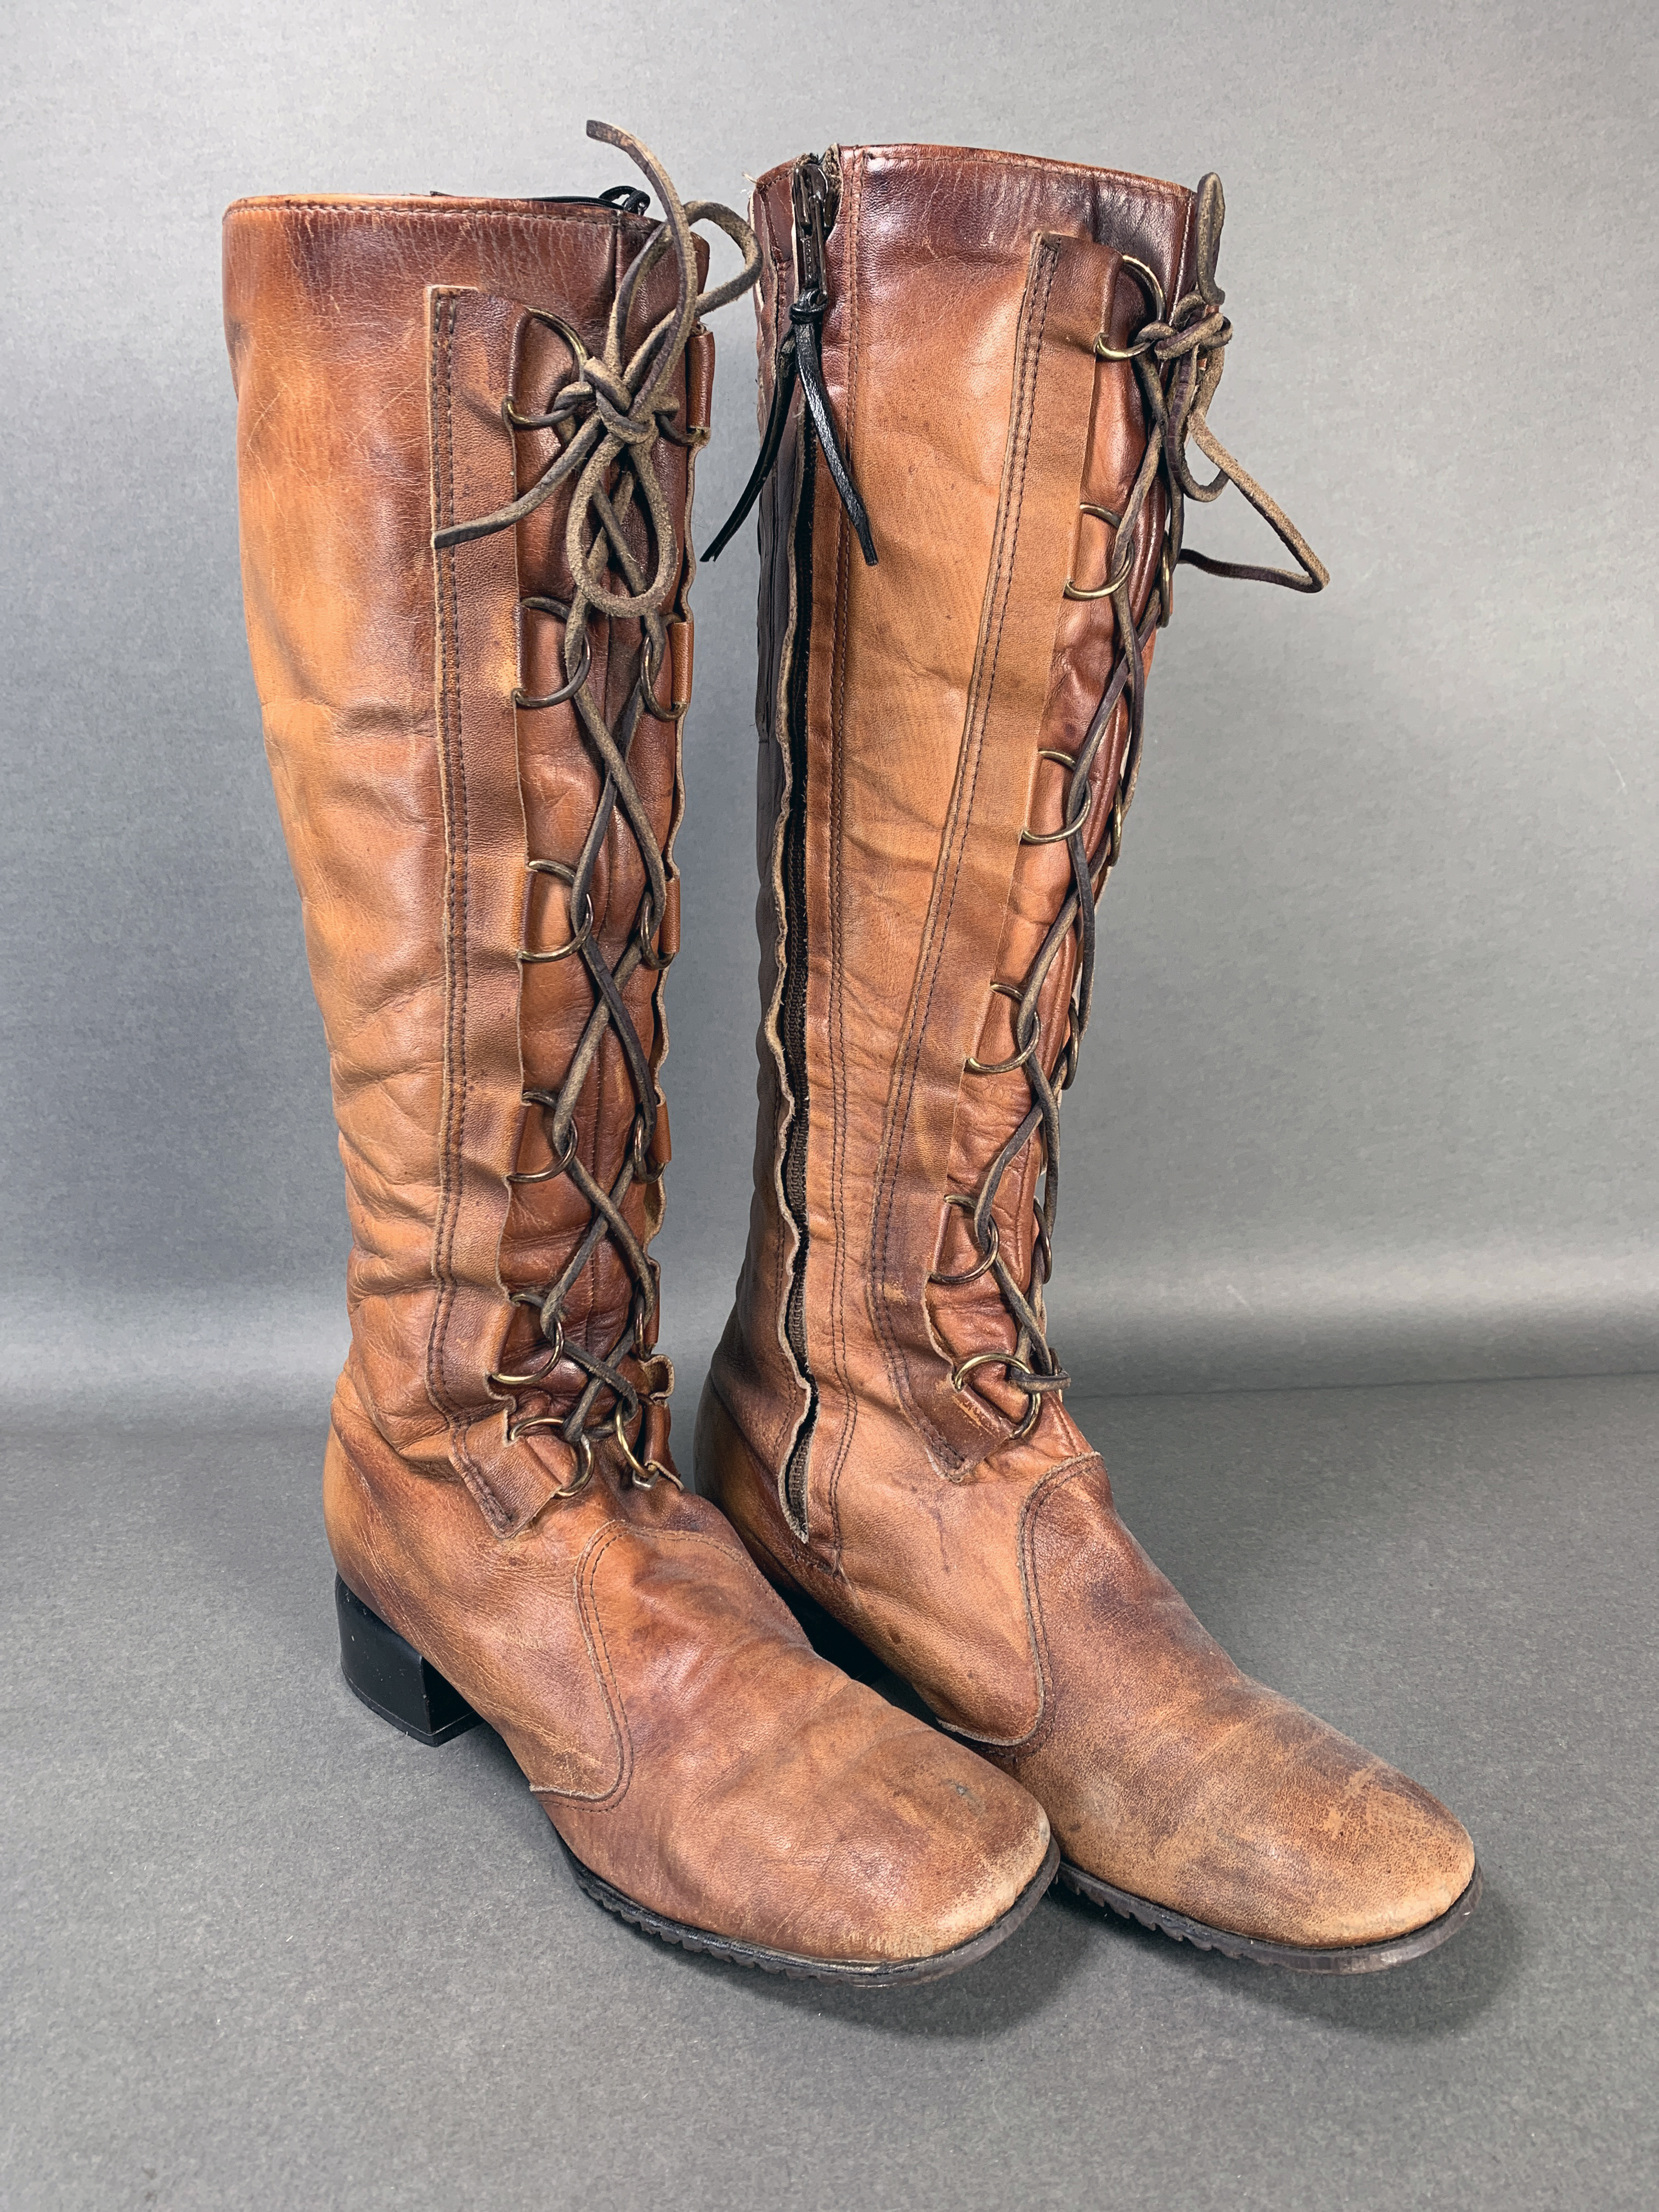 Pair Of Brown Leather Knee High Boots image 1